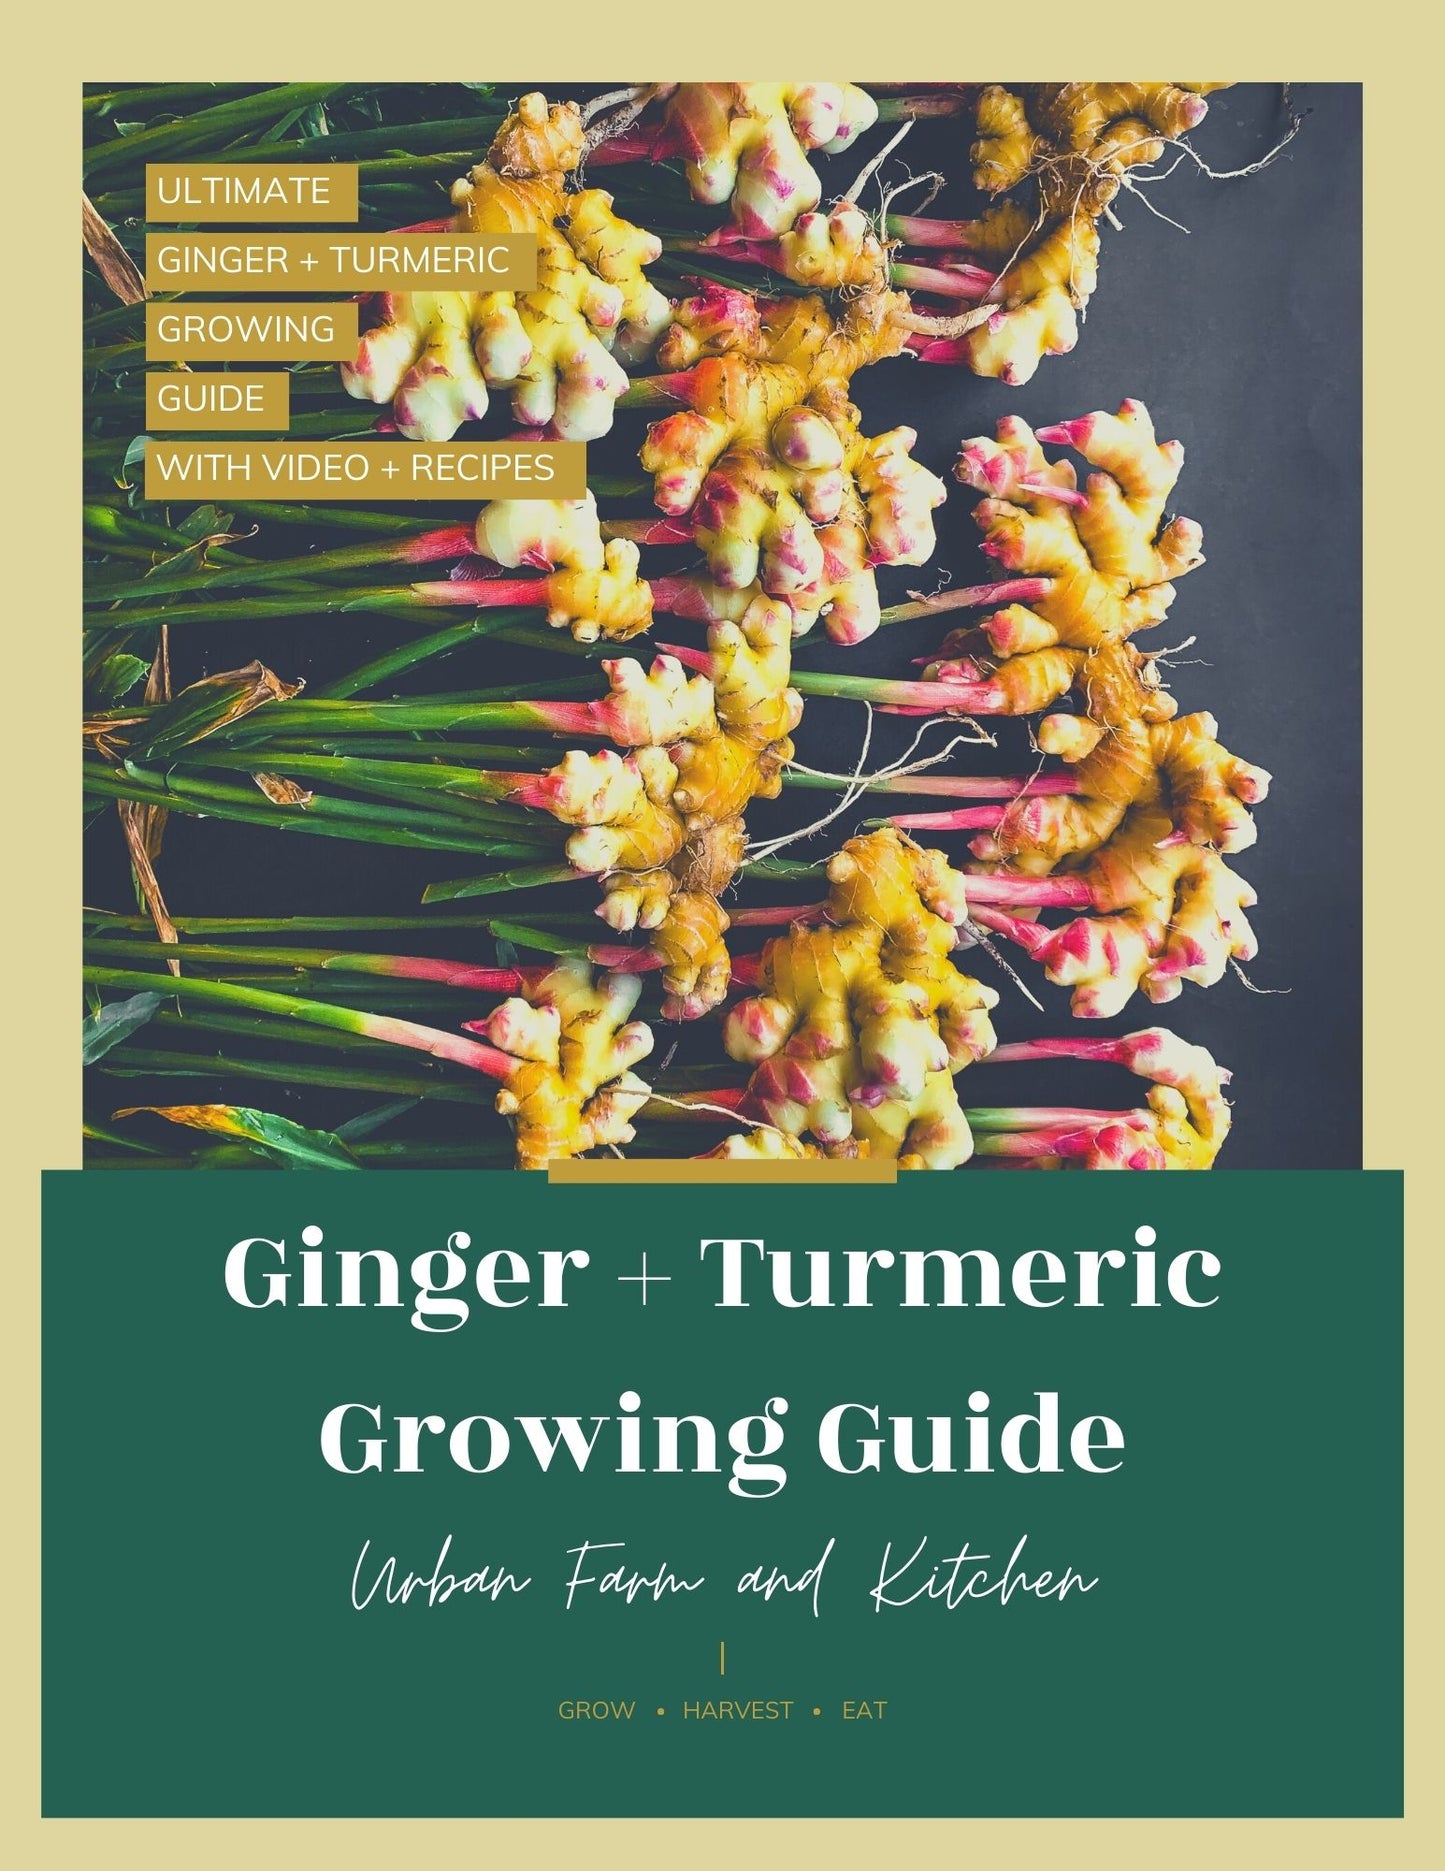 Ginger + Turmeric Growing Guide eBook [with video]